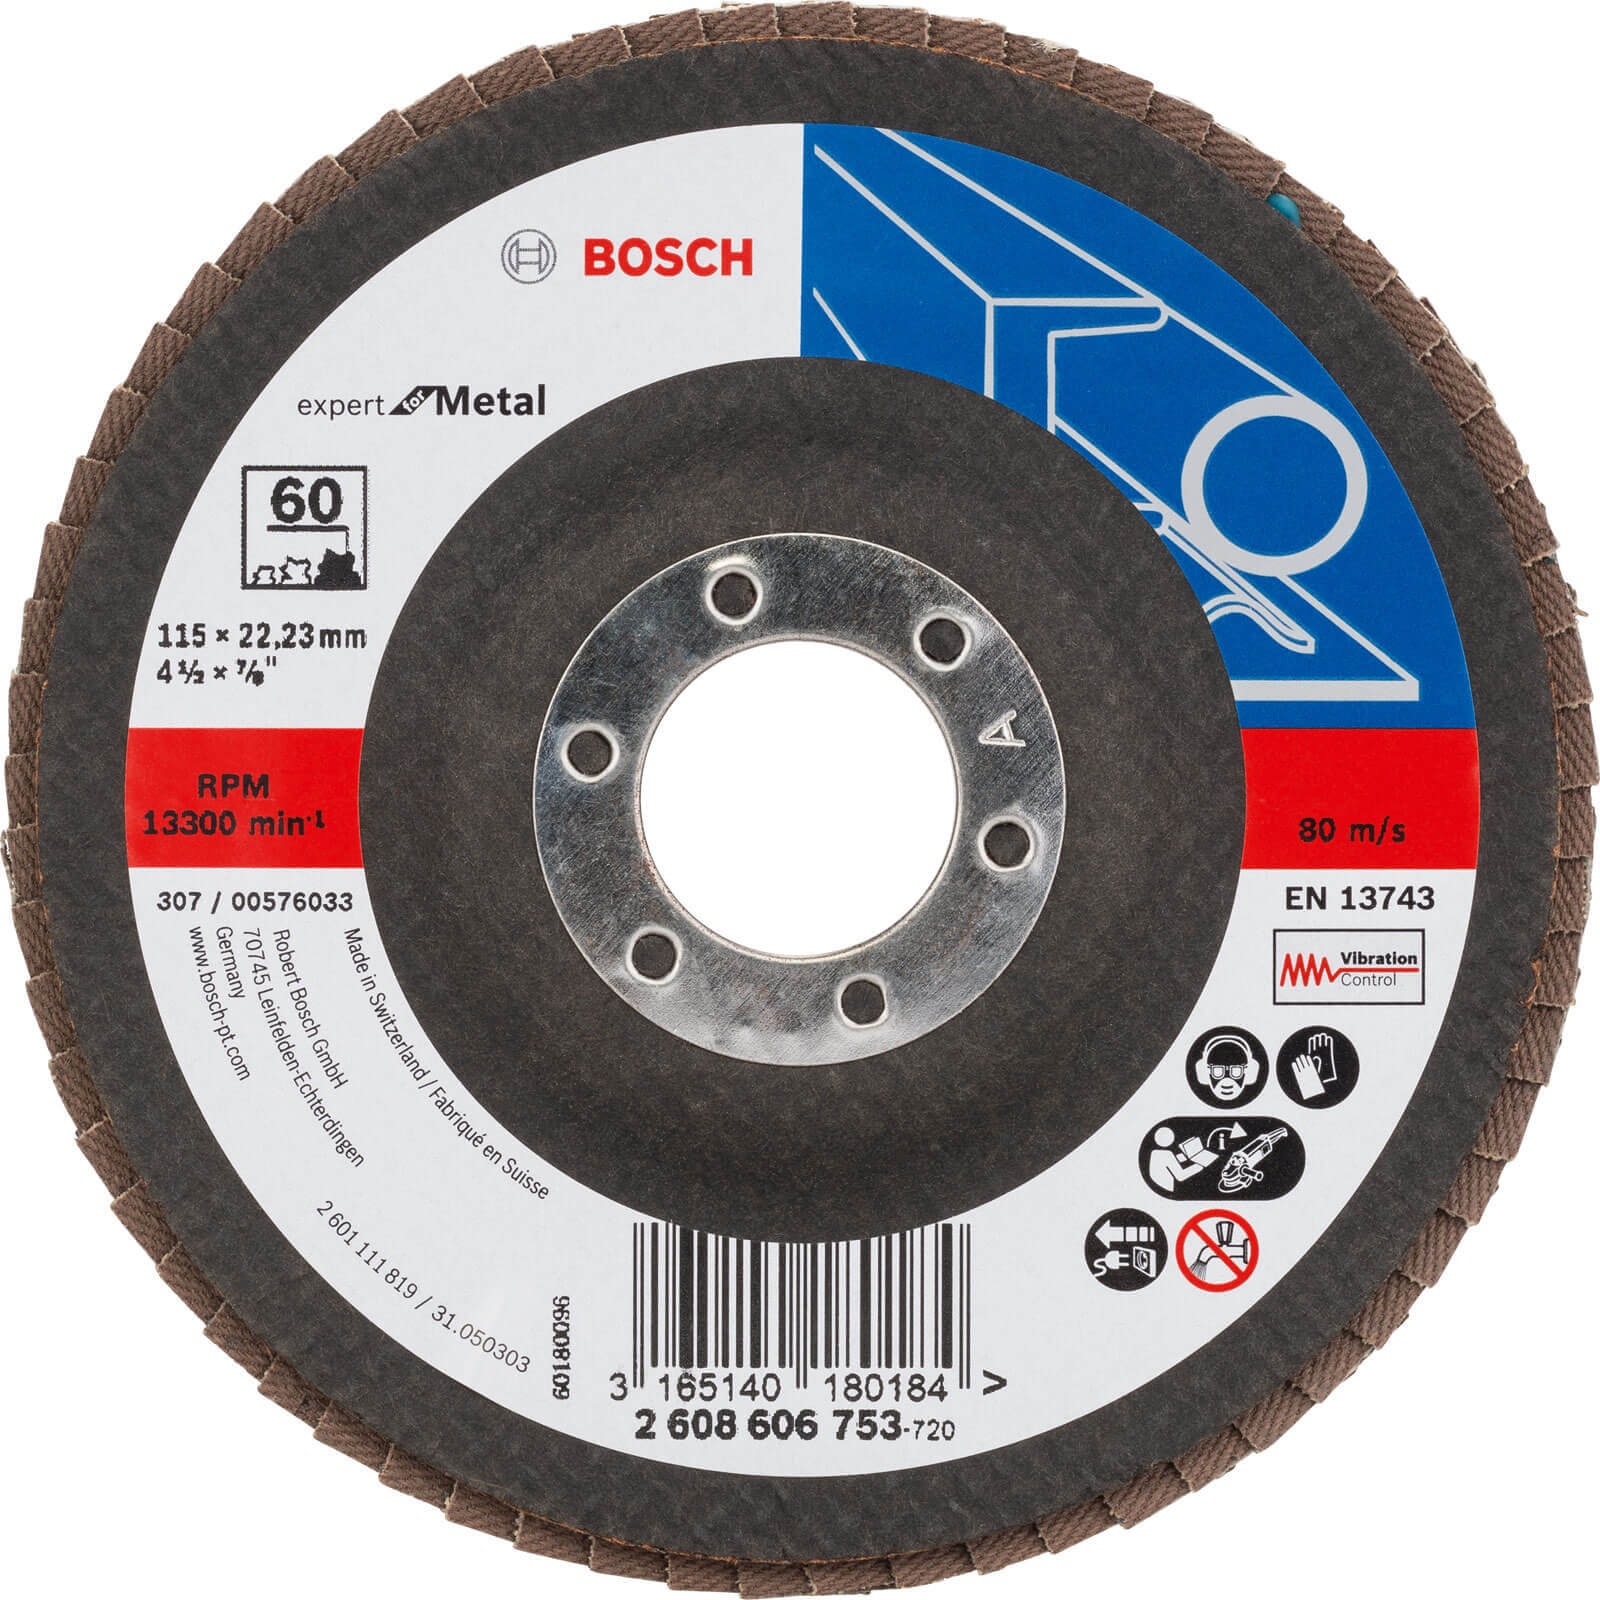 Image of Bosch Expert X551 for Metal Angled Flap Disc 115mm 60g Pack of 1